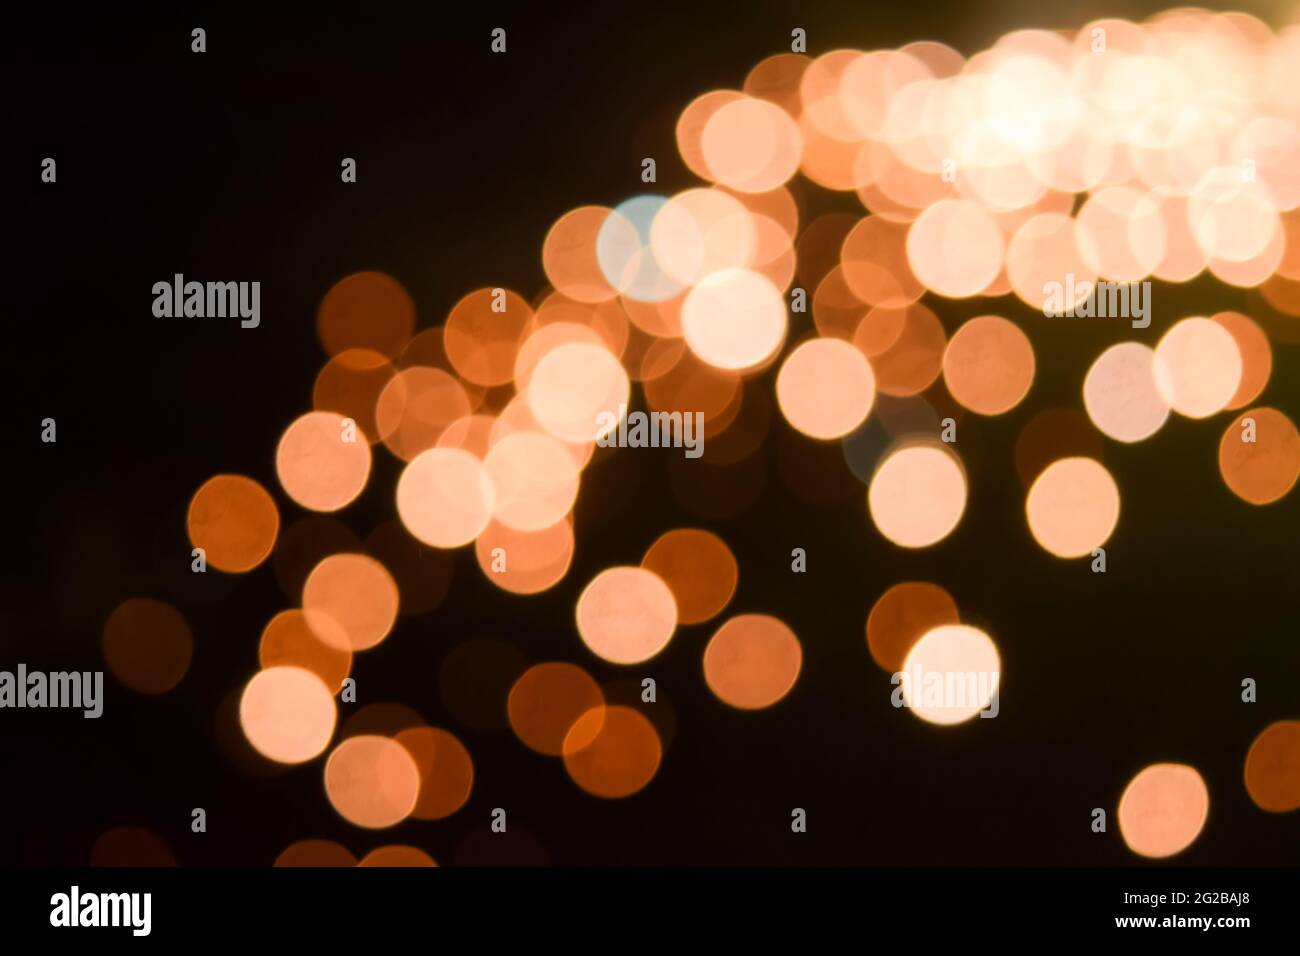 Abstract bokeh of light for background of Orange colored shades with black colored background. Stock Photo